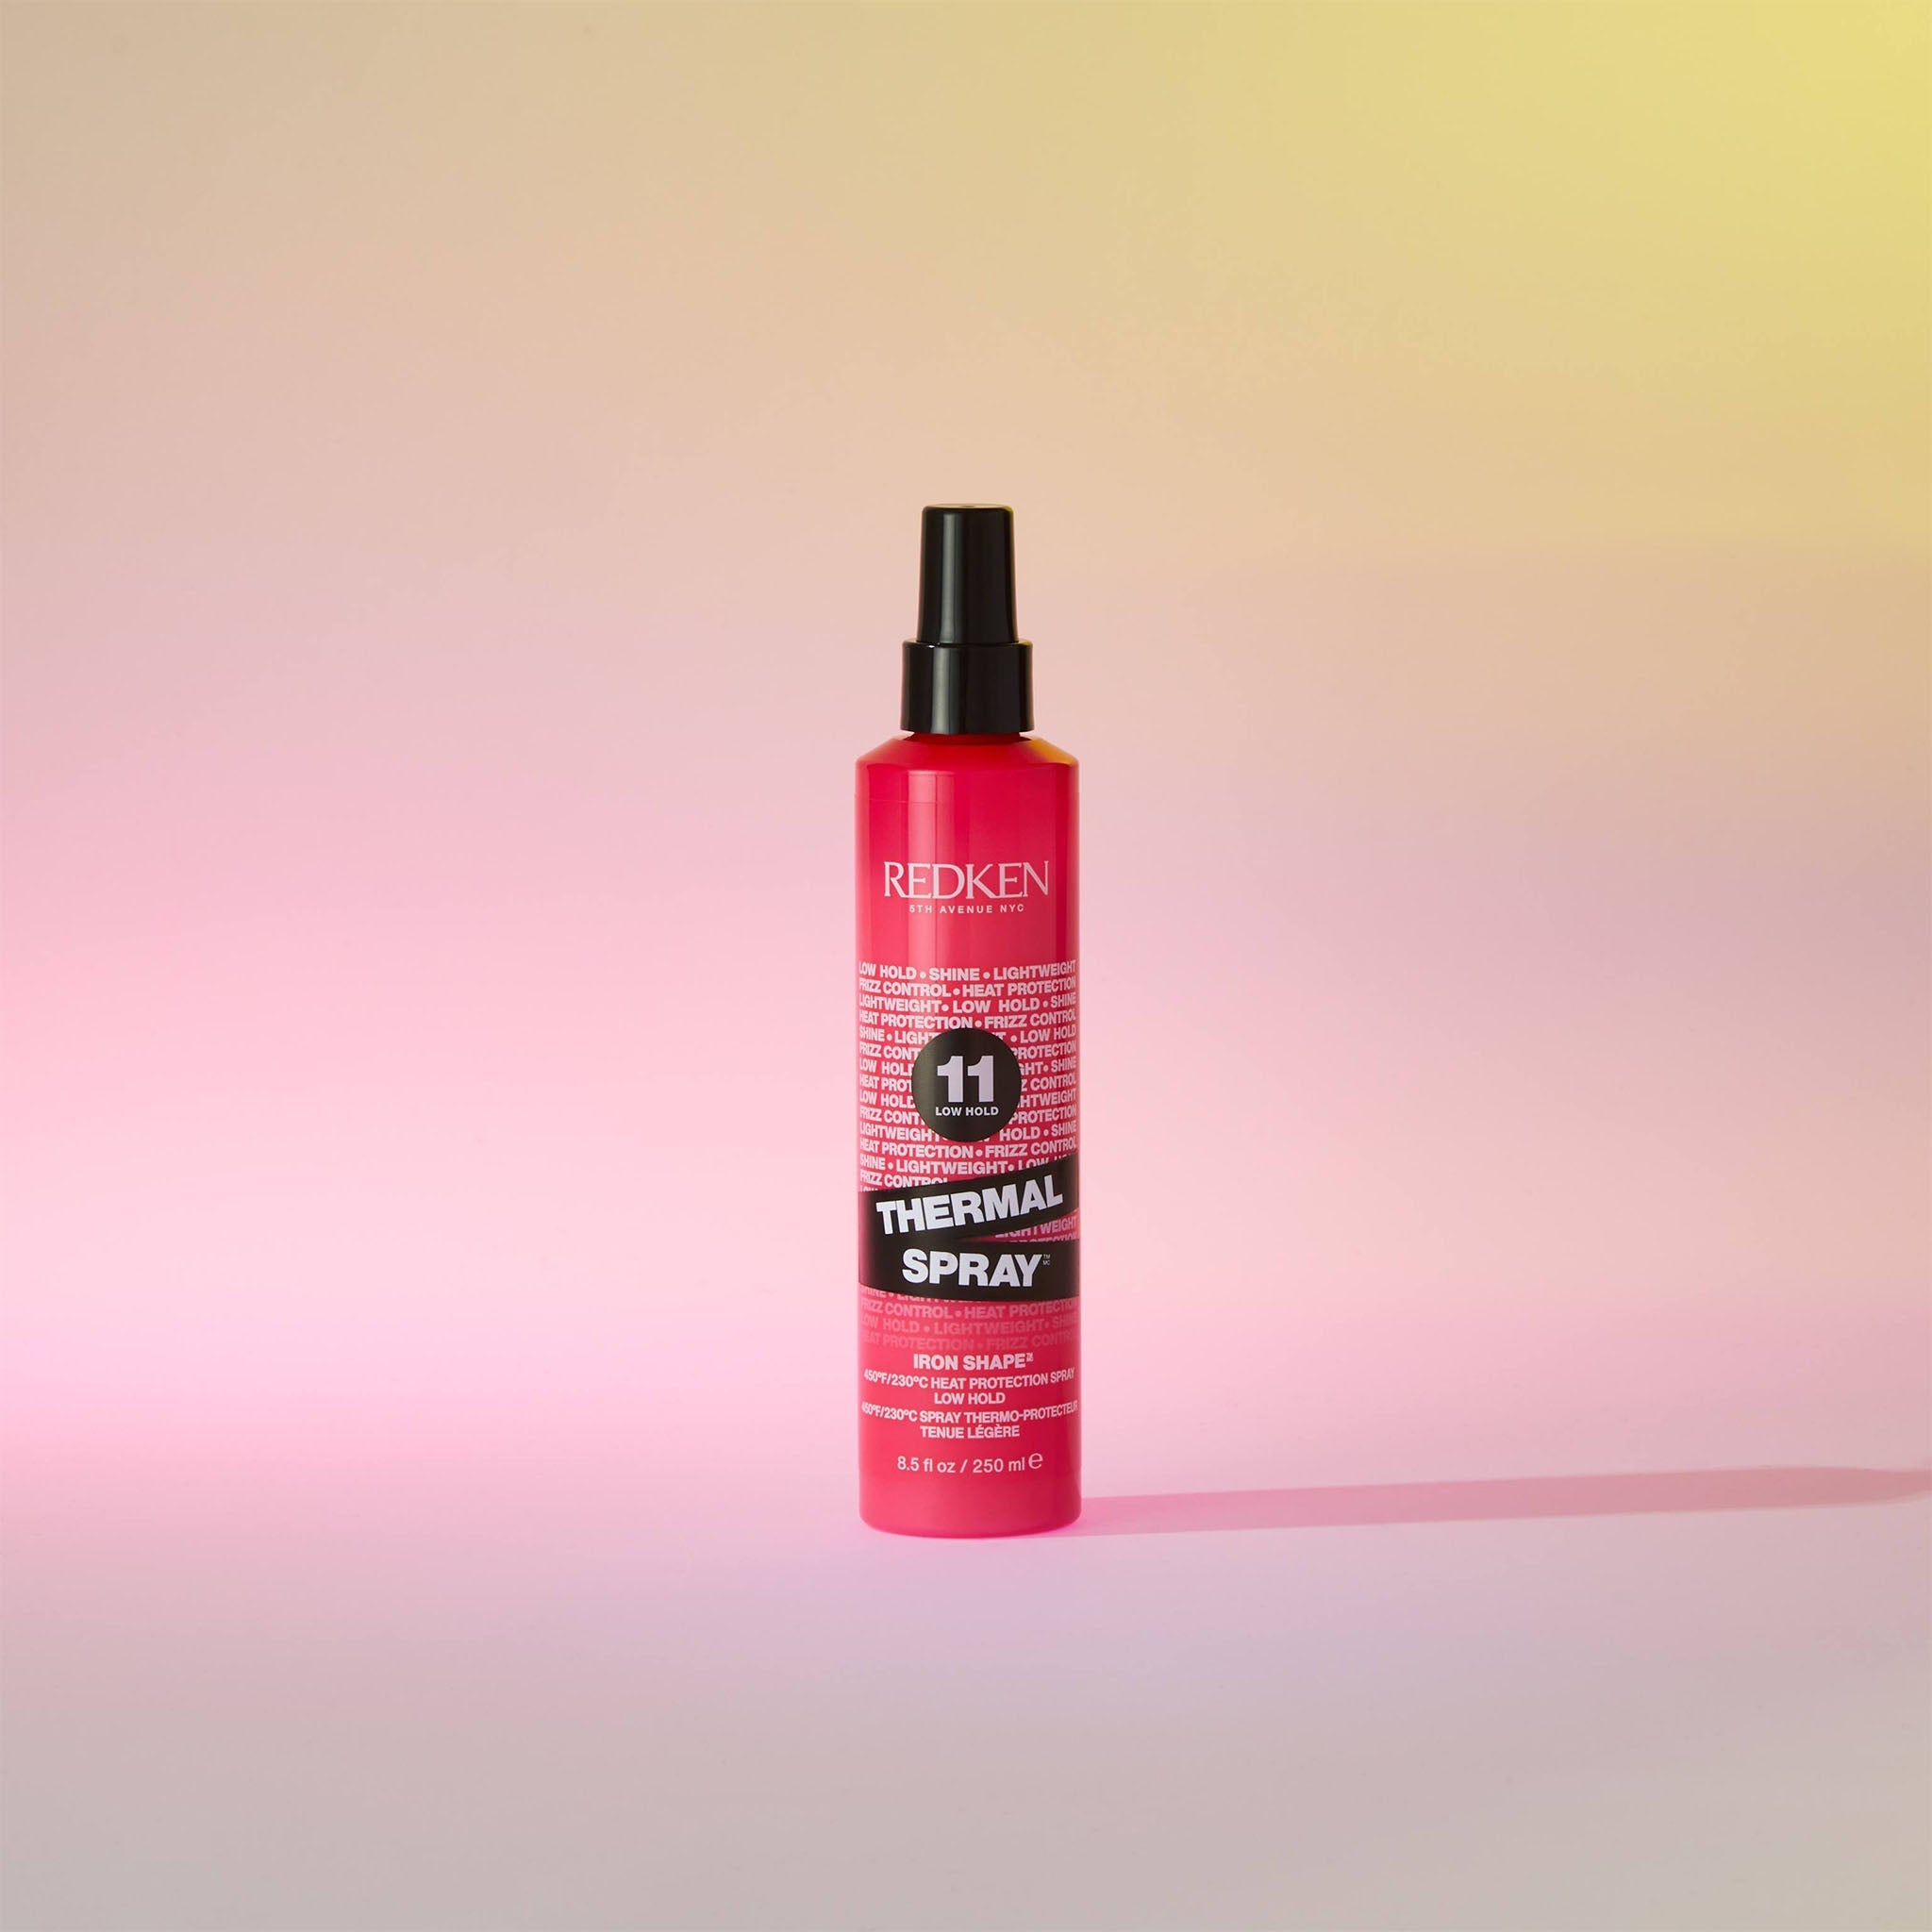 Redken. Spray Thermal Tenue Legere Low Hold 11 - 250ml - Concept C. Shop